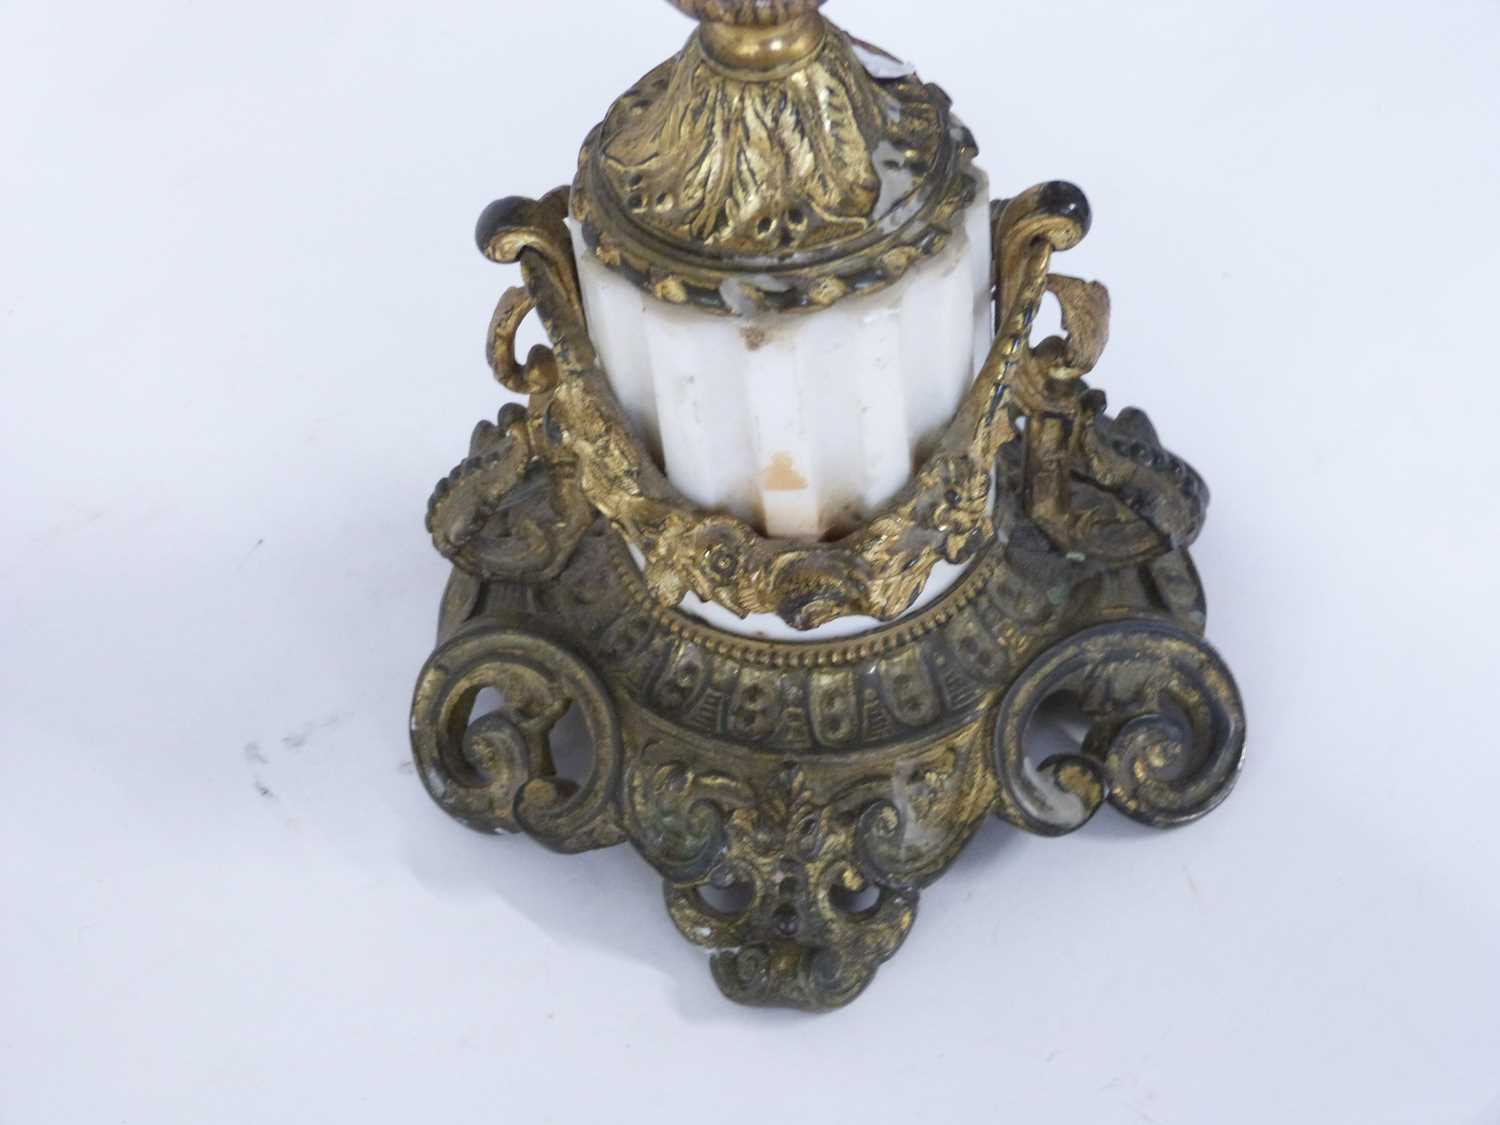 Pair of candelabra in French Empire style the four branch candelabra supported by a bronzed cherub - Image 6 of 6